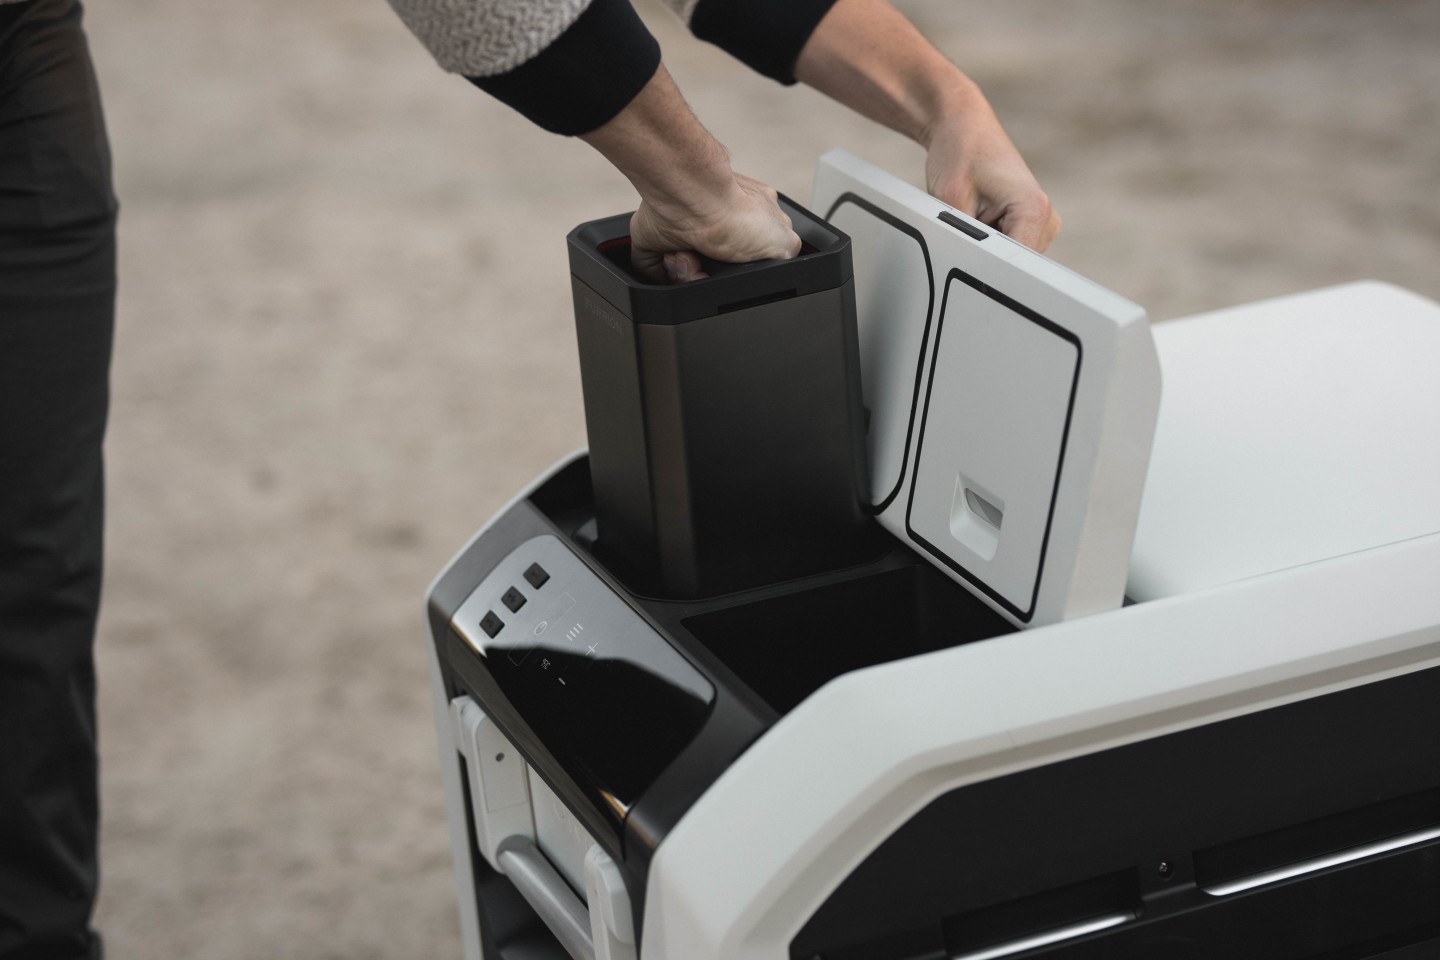 The available ePod battery drops into the battery compartment to turn the eRove into a self-powered off-grid compressor fridge; the second compartment can store a backup ePod